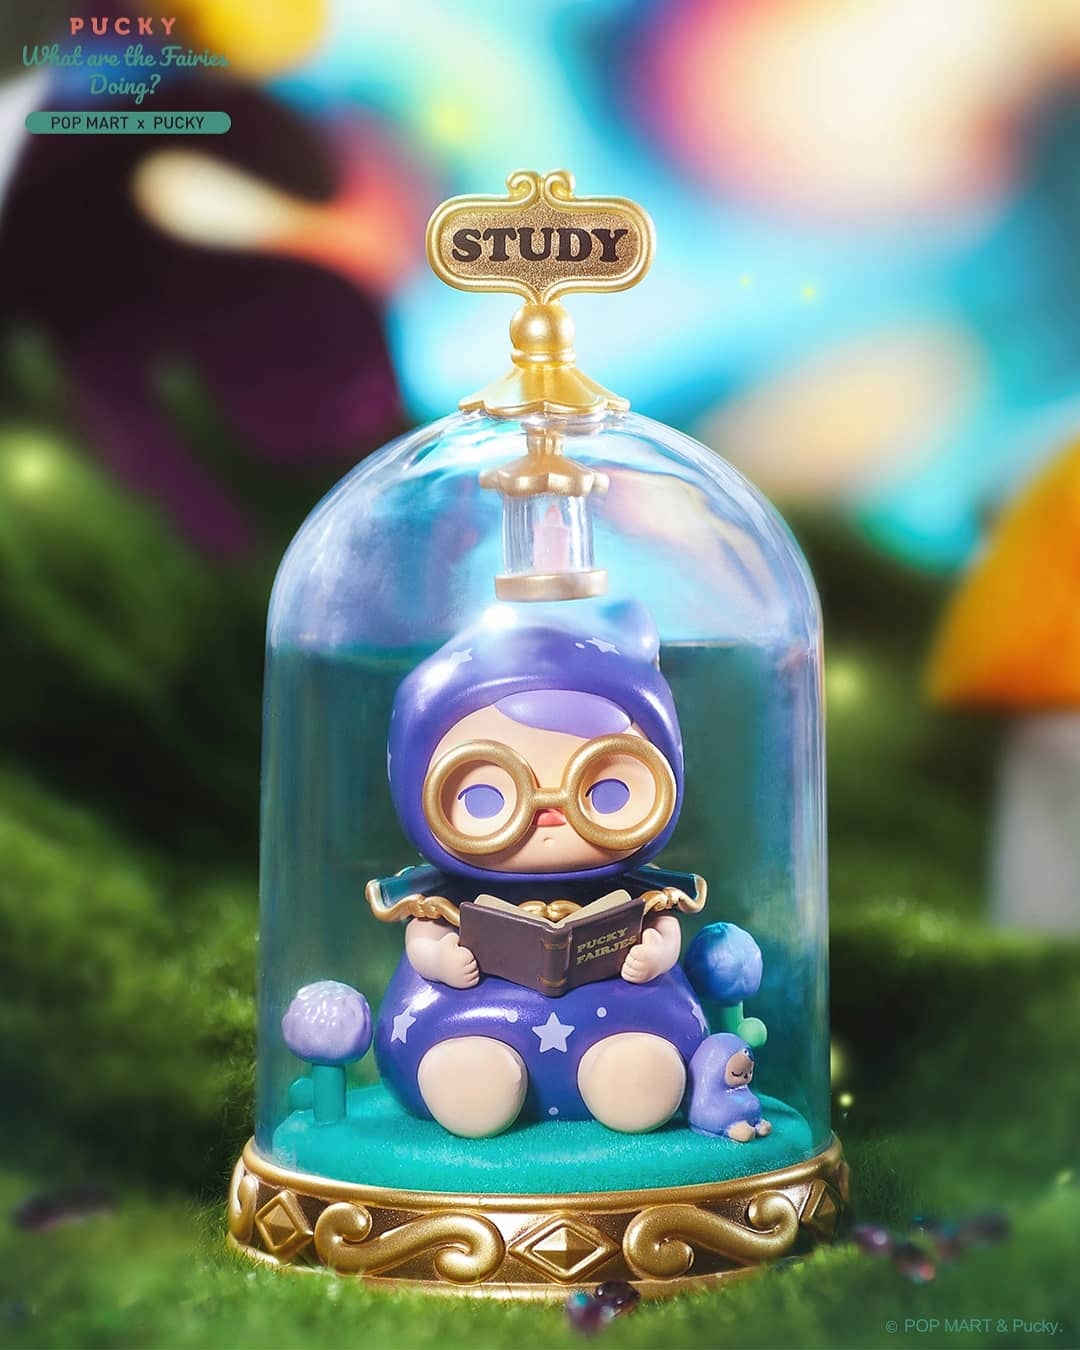 Pucky What Are The Fairies Doing Series toy figurine in a glass dome with a purple ball and a woman reading a book.